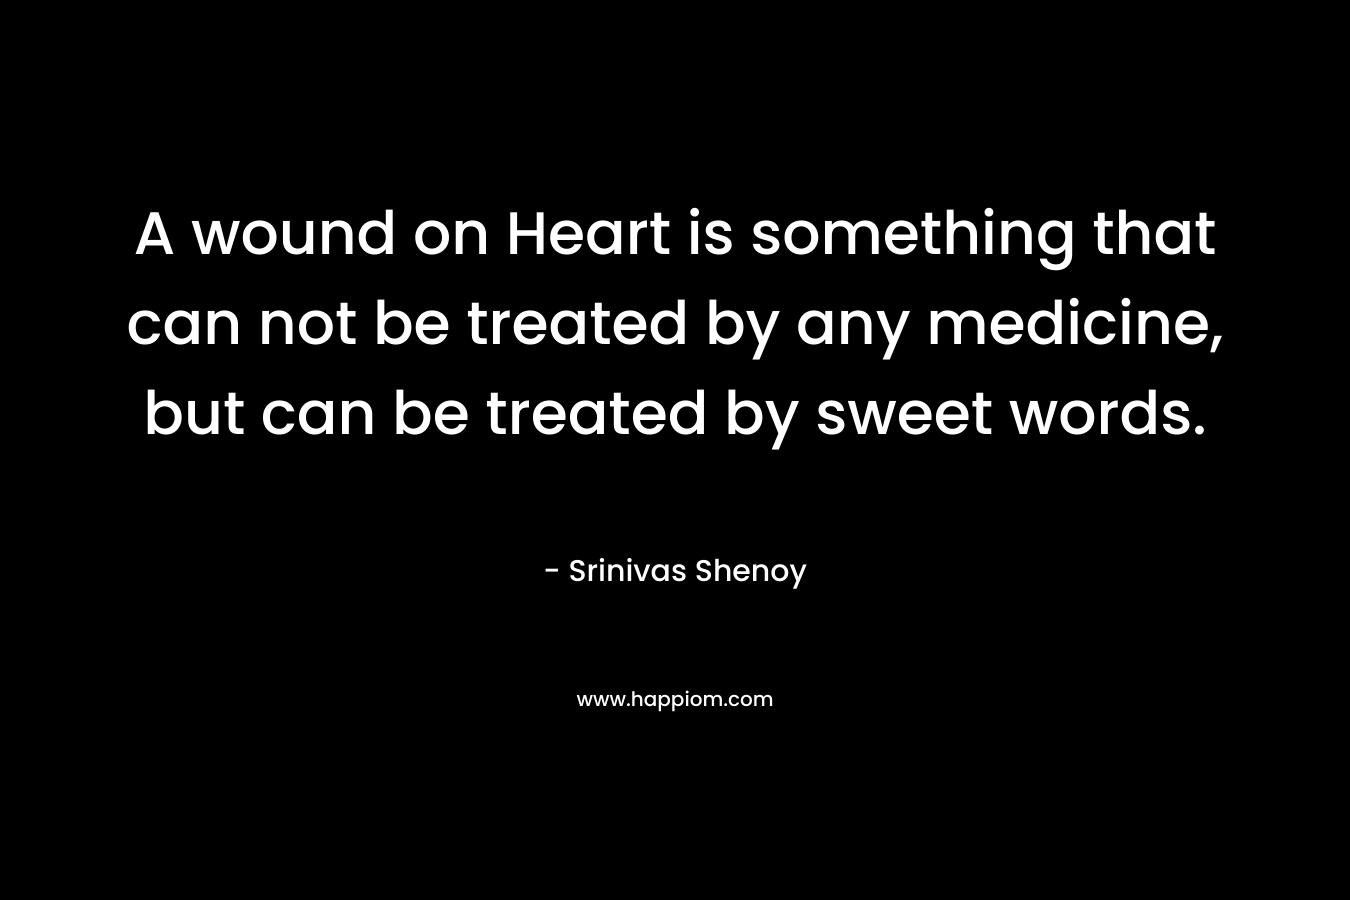 A wound on Heart is something that can not be treated by any medicine, but can be treated by sweet words.